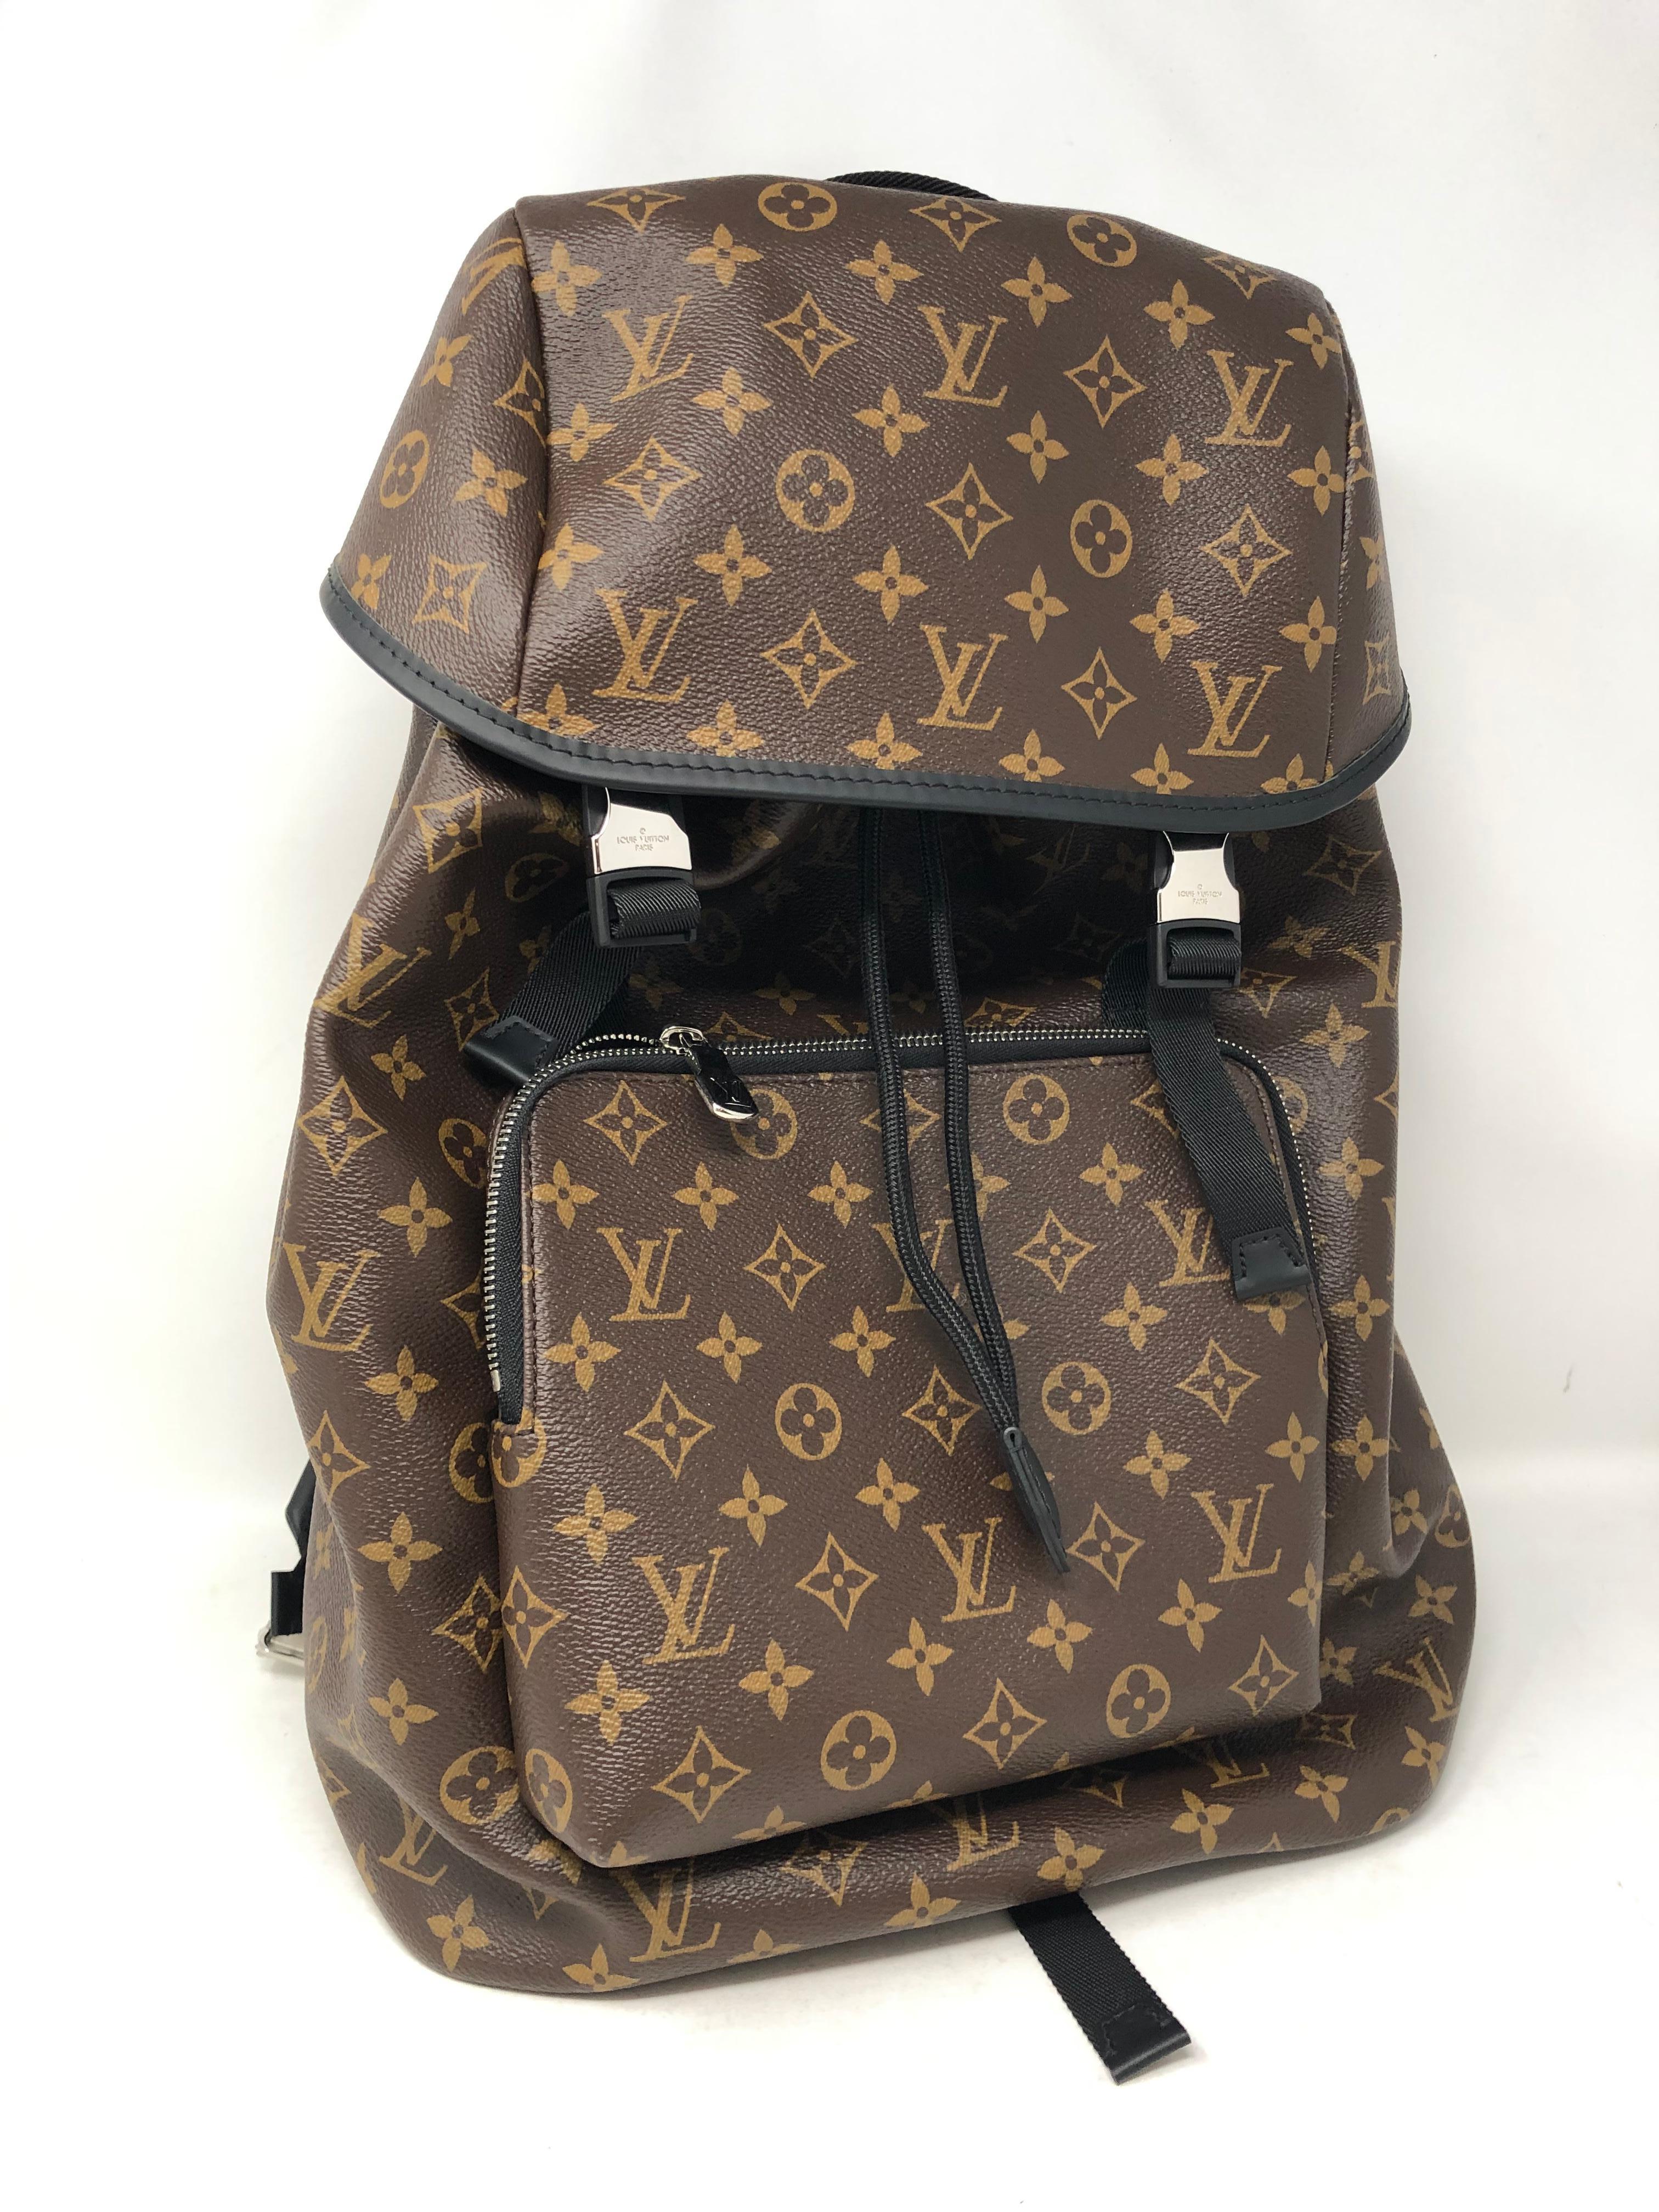 Louis Vuitton backpack Zack Monogram Macassar Brown. Brand new condition. Never used. 18.5 H, 12 wide, 6.5 depth.  Roomy size backpack for all your needs. Guaranteed authentic. 